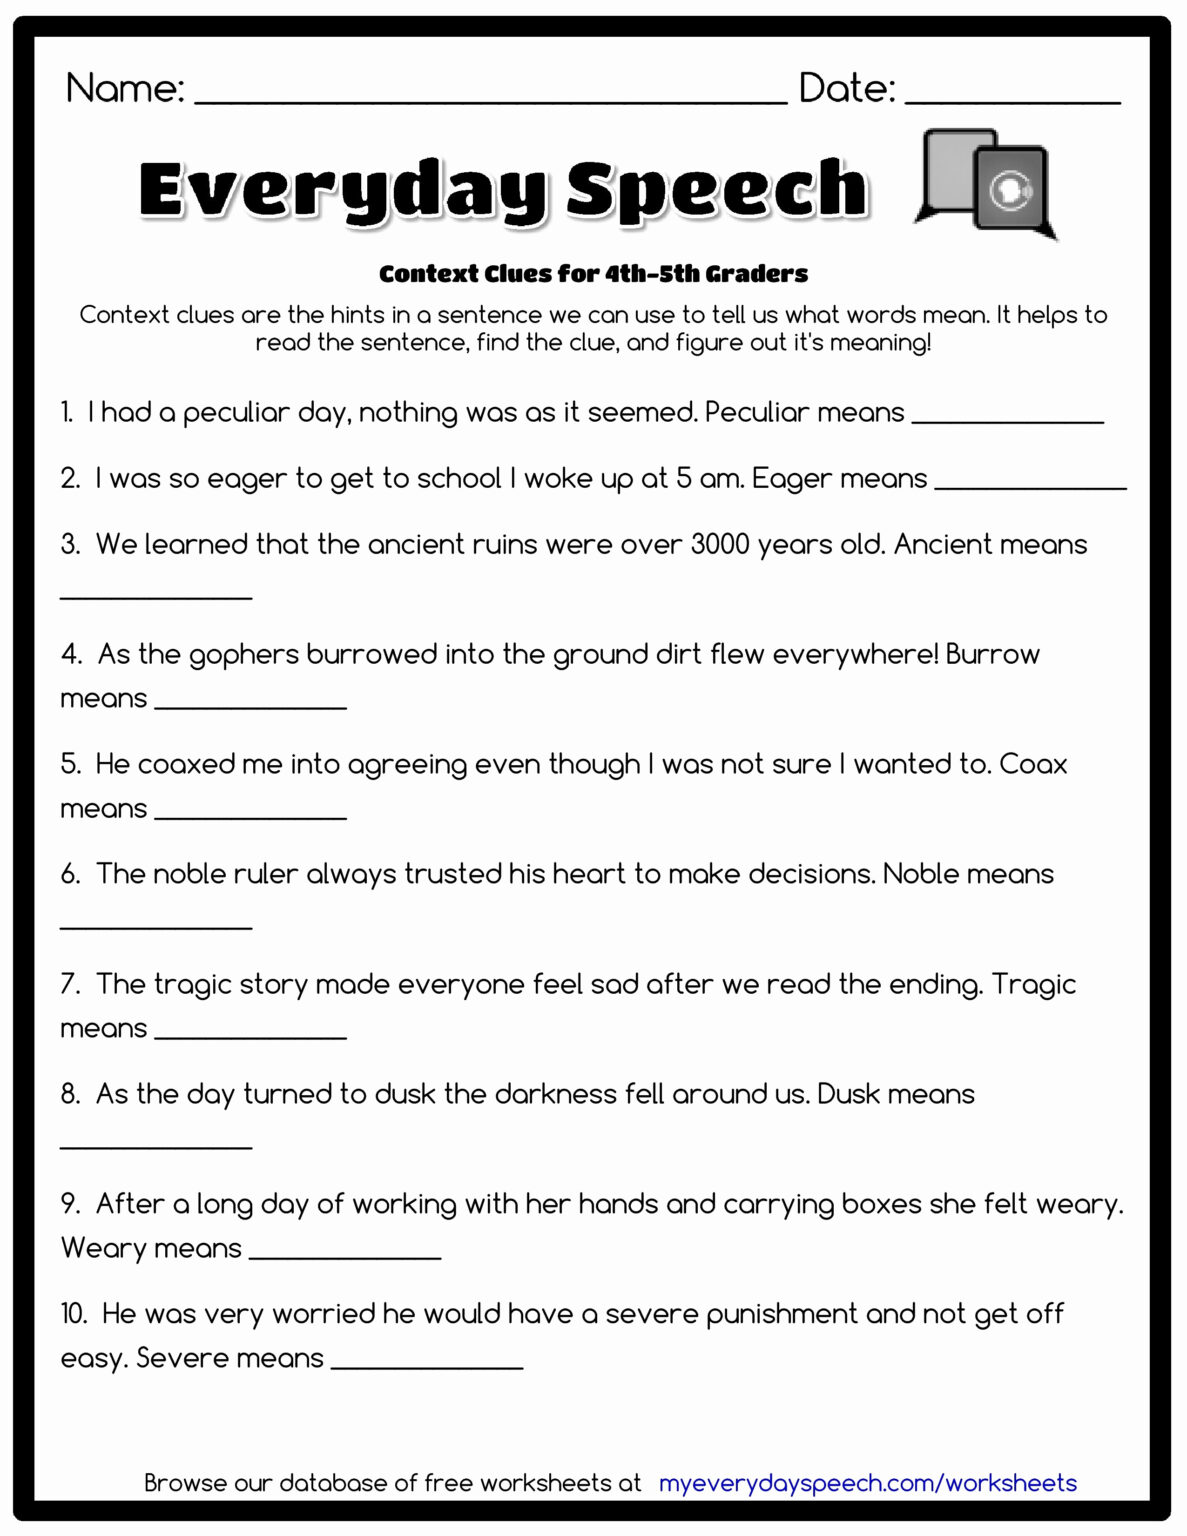 free-printable-worksheets-for-3rd-grade-science-printable-worksheets